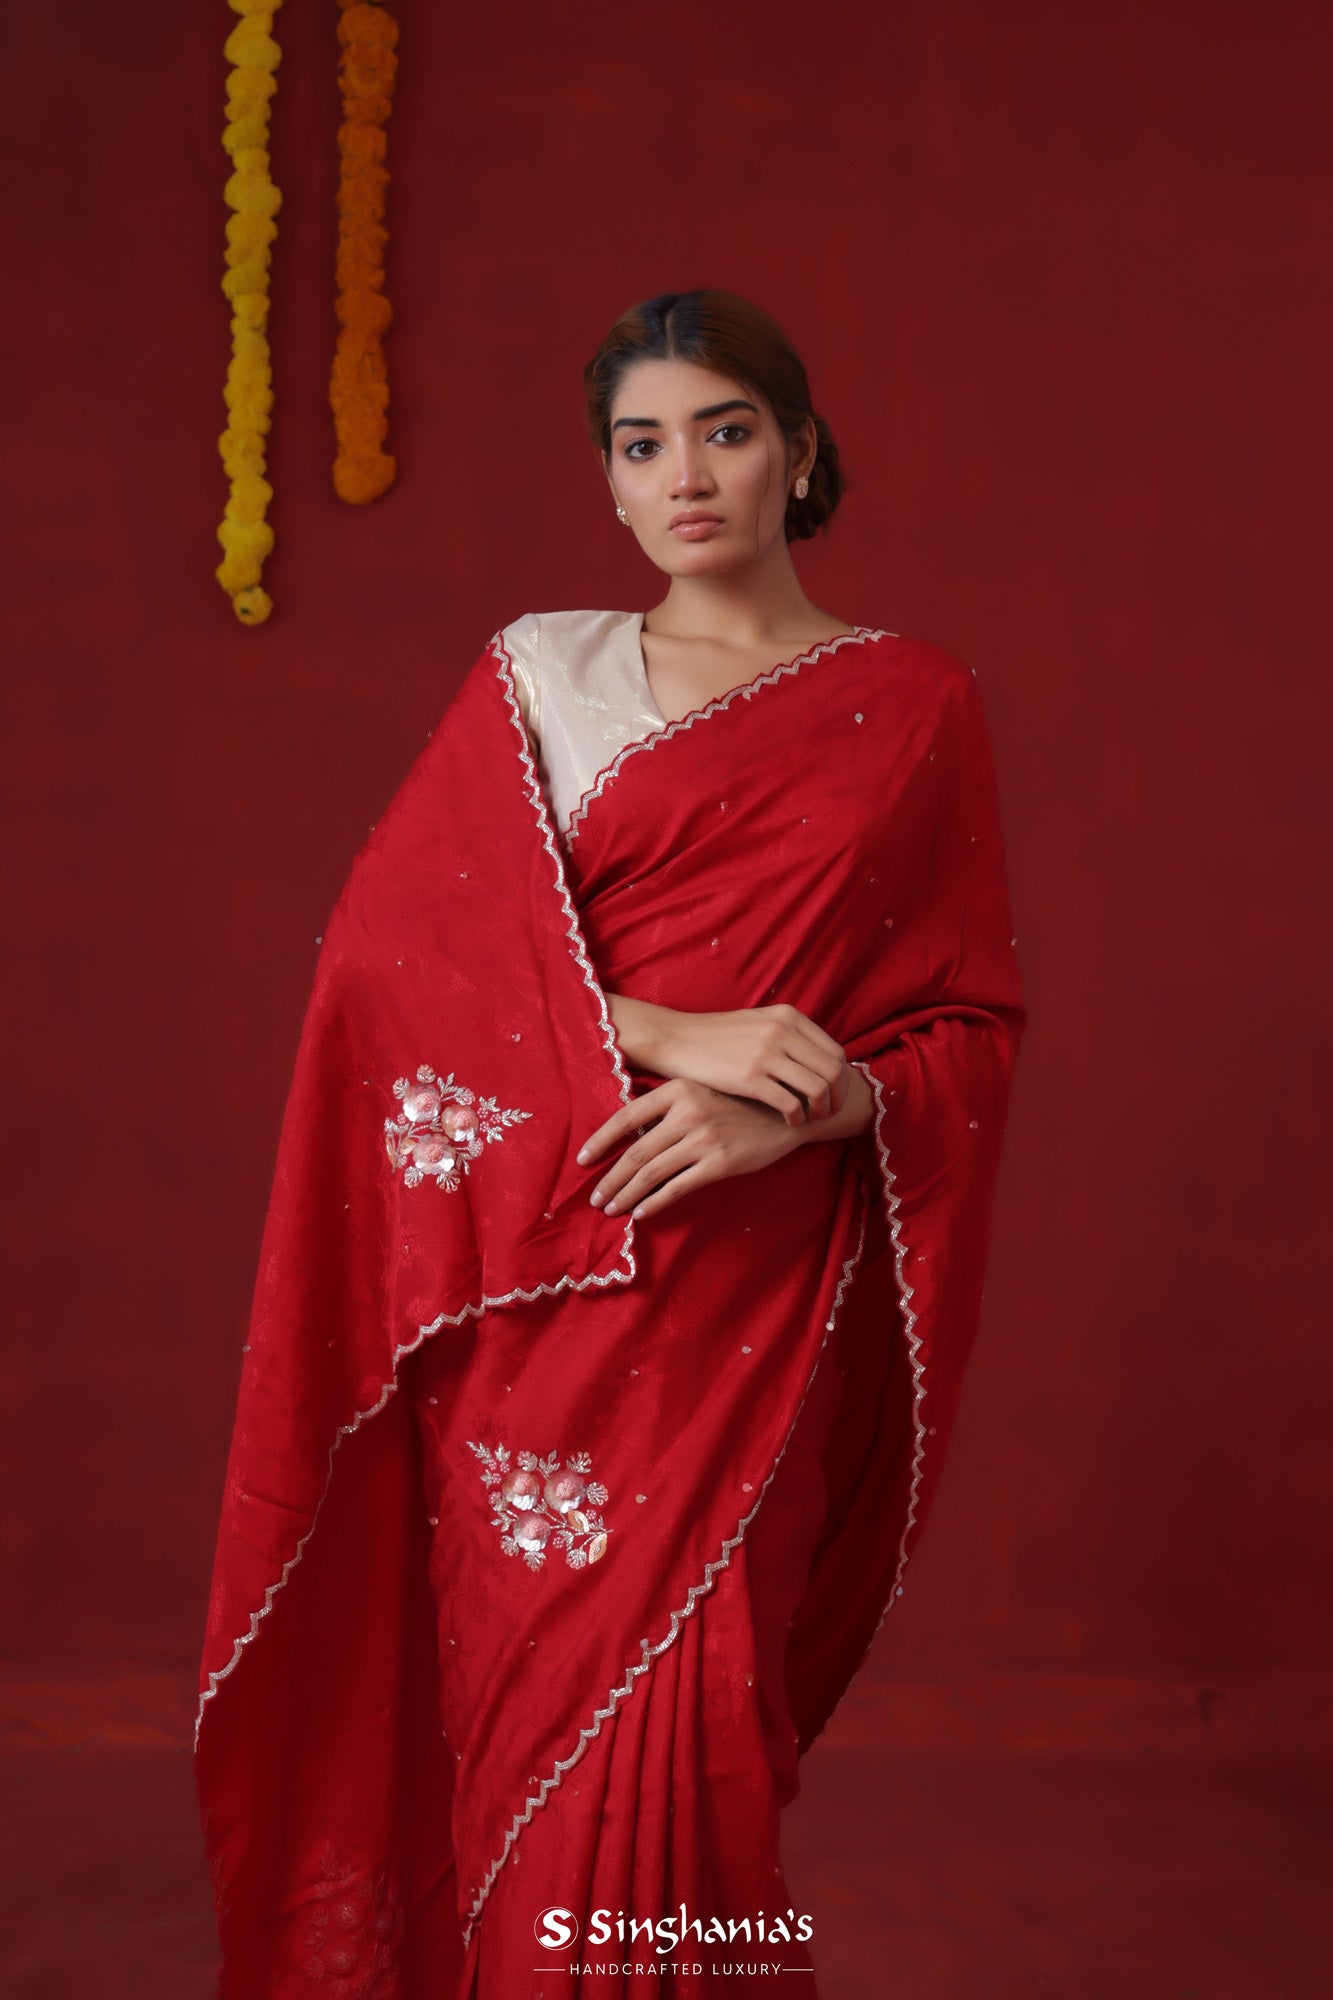 Crimson Red Modal Satin Saree With Hand Embroidery